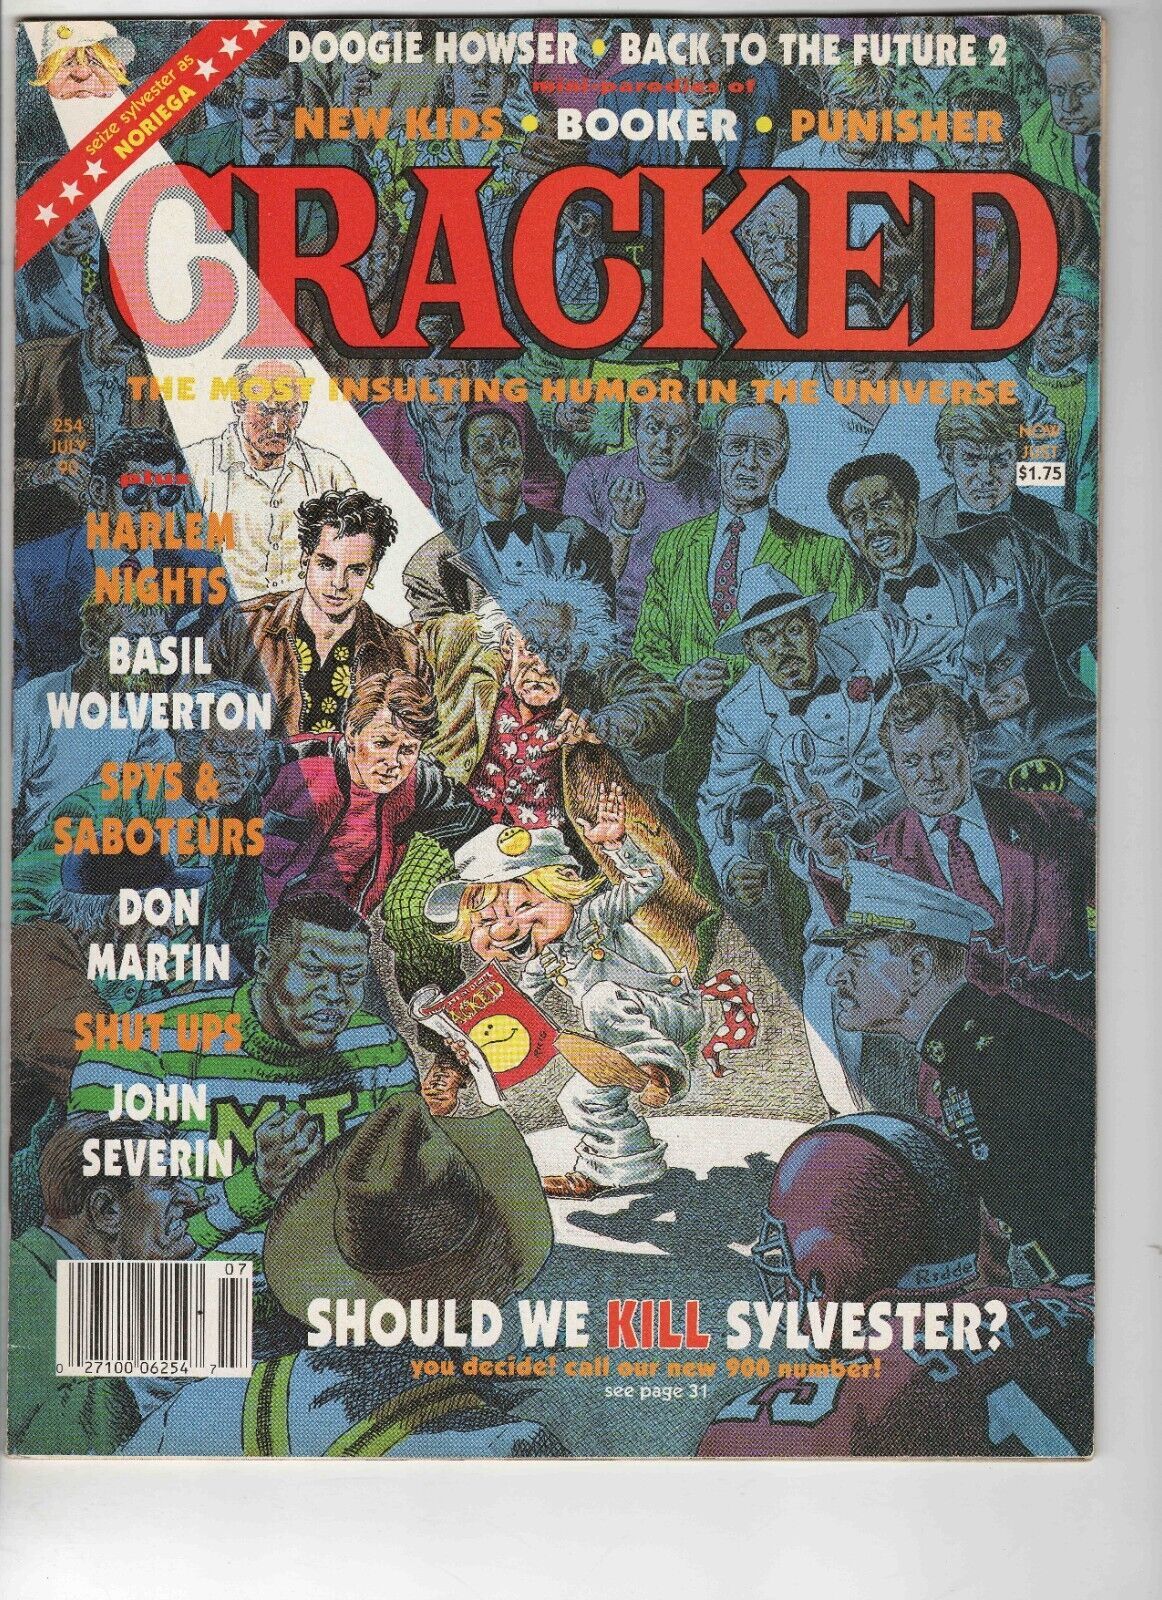 Primary image for VINTAGE July 1990 Cracked Magazine #254 Doogie Howser Back to the Future